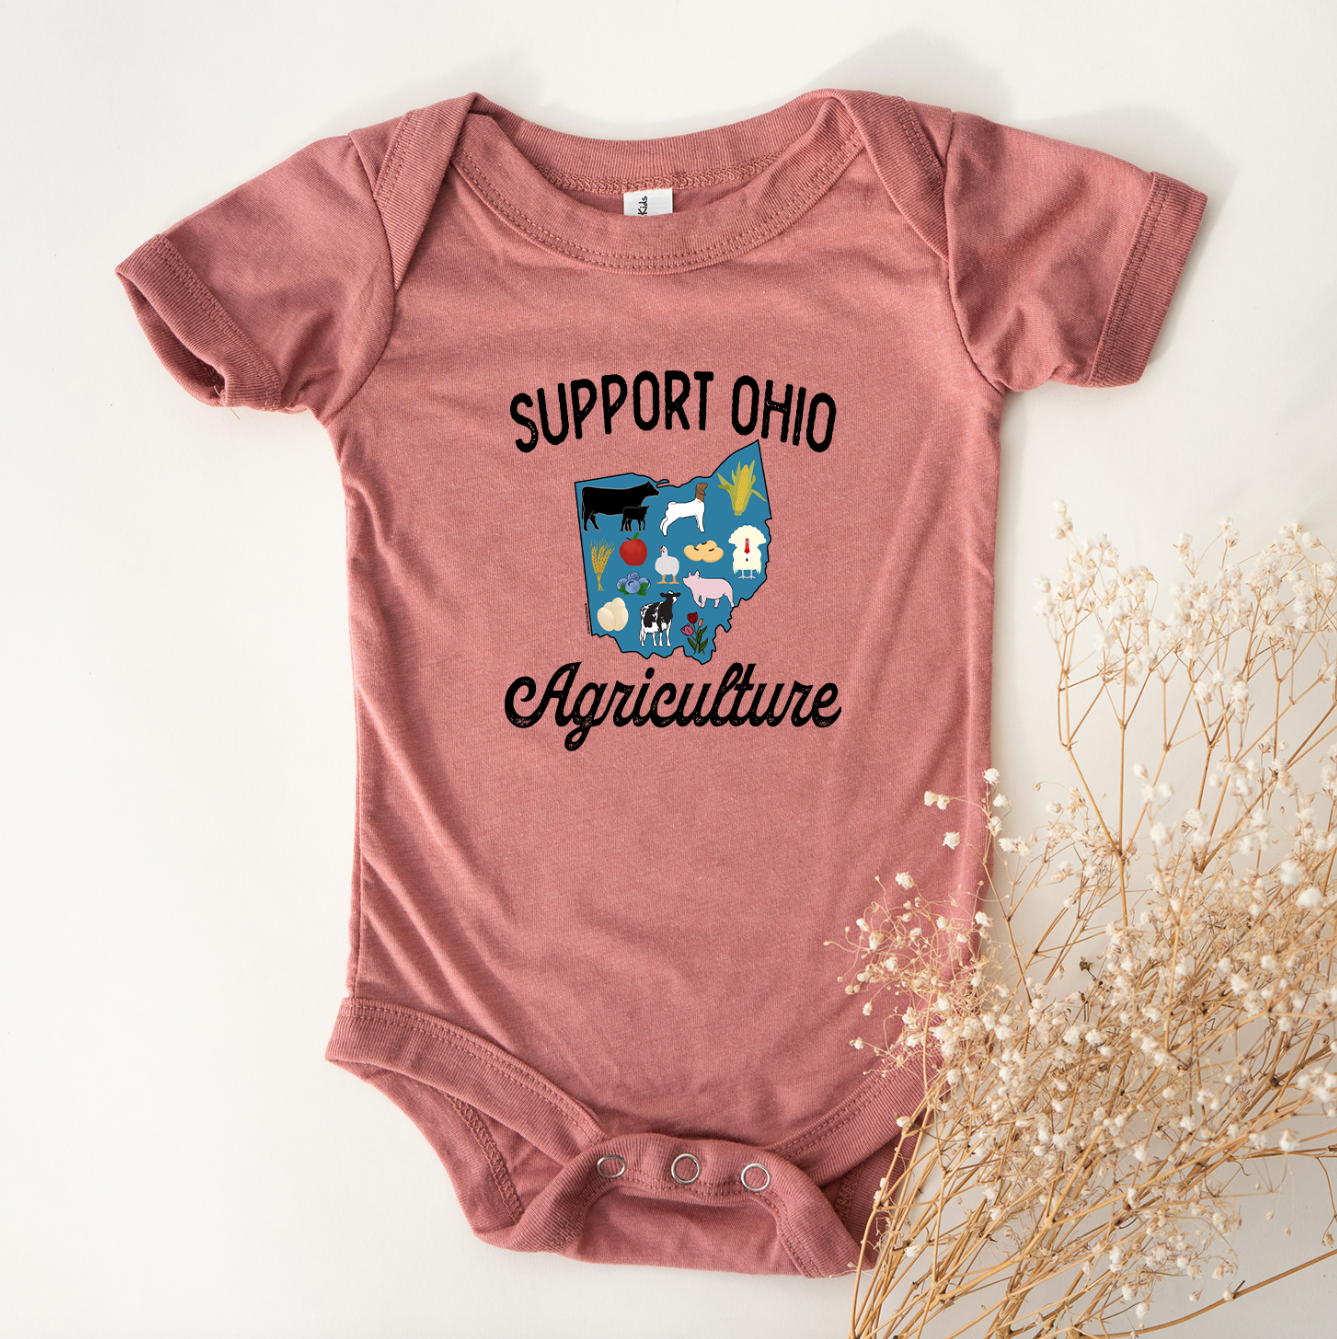 Support Ohio Agriculture One Piece/T-Shirt (Newborn - Youth XL) - Multiple Colors!